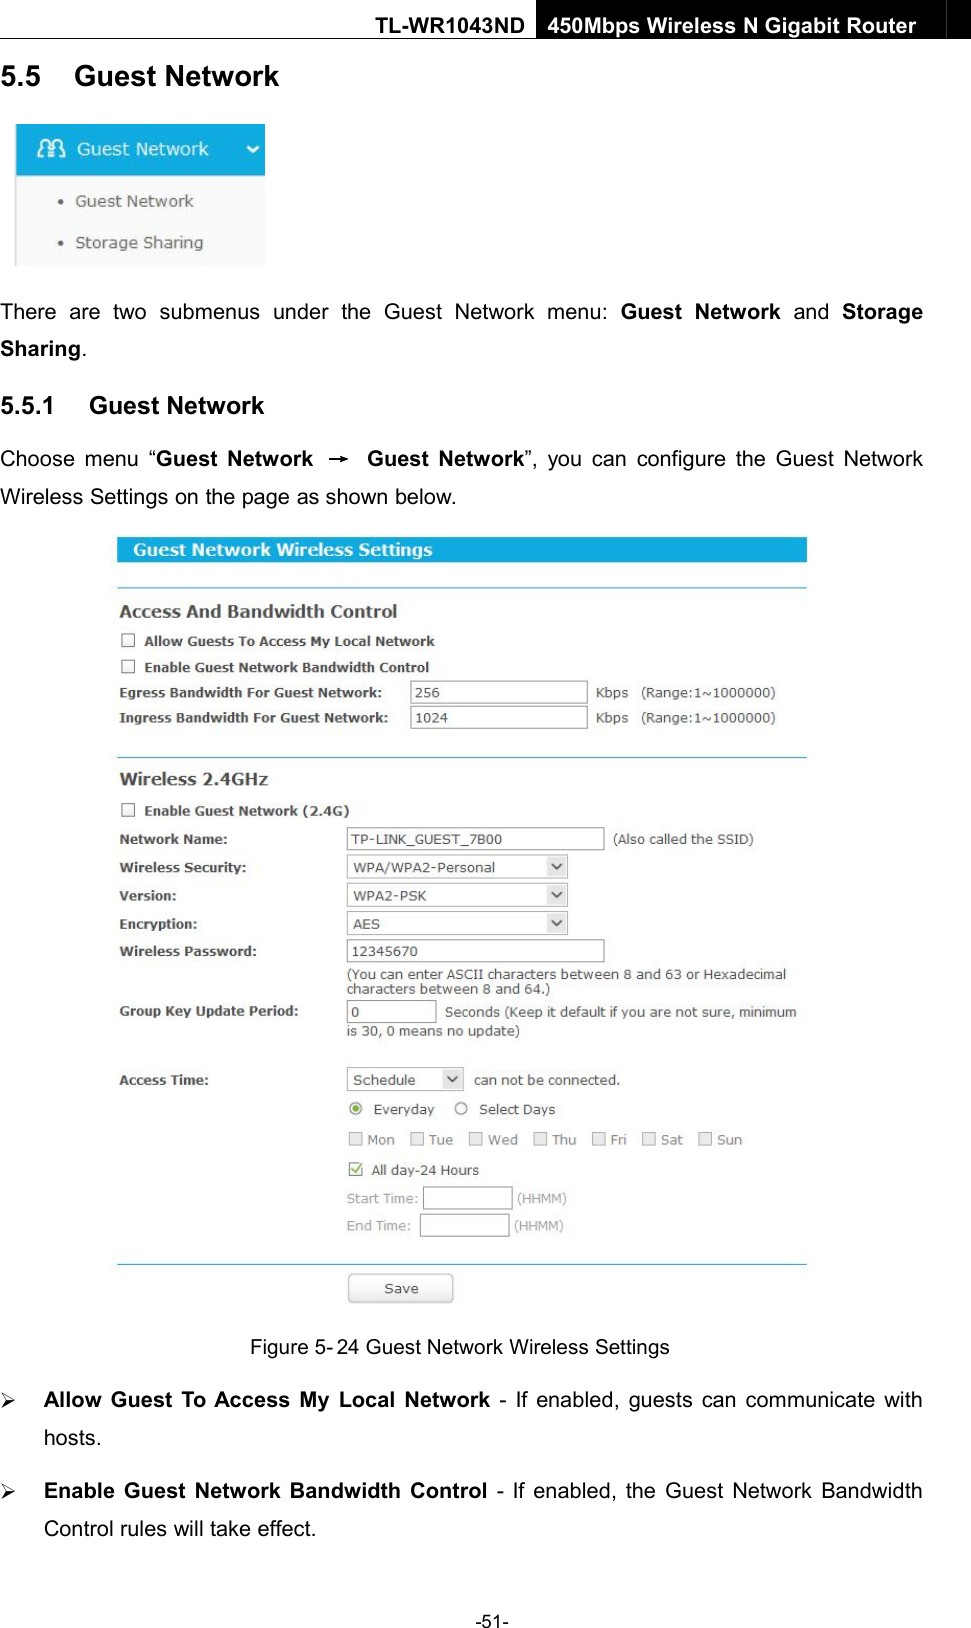 -51-TL-WR1043ND450Mbps Wireless N Gigabit Router5.5 Guest NetworkThere are two submenus under the Guest Network menu: Guest Network and StorageSharing.5.5.1 Guest NetworkChoose menu “Guest Network →Guest Network”, you can configure the Guest NetworkWireless Settings on the page as shown below.Figure 5- 24 Guest Network Wireless SettingsAllow Guest To Access My Local Network - If enabled, guests can communicate withhosts.Enable Guest Network Bandwidth Control - If enabled, the Guest Network BandwidthControl rules will take effect.